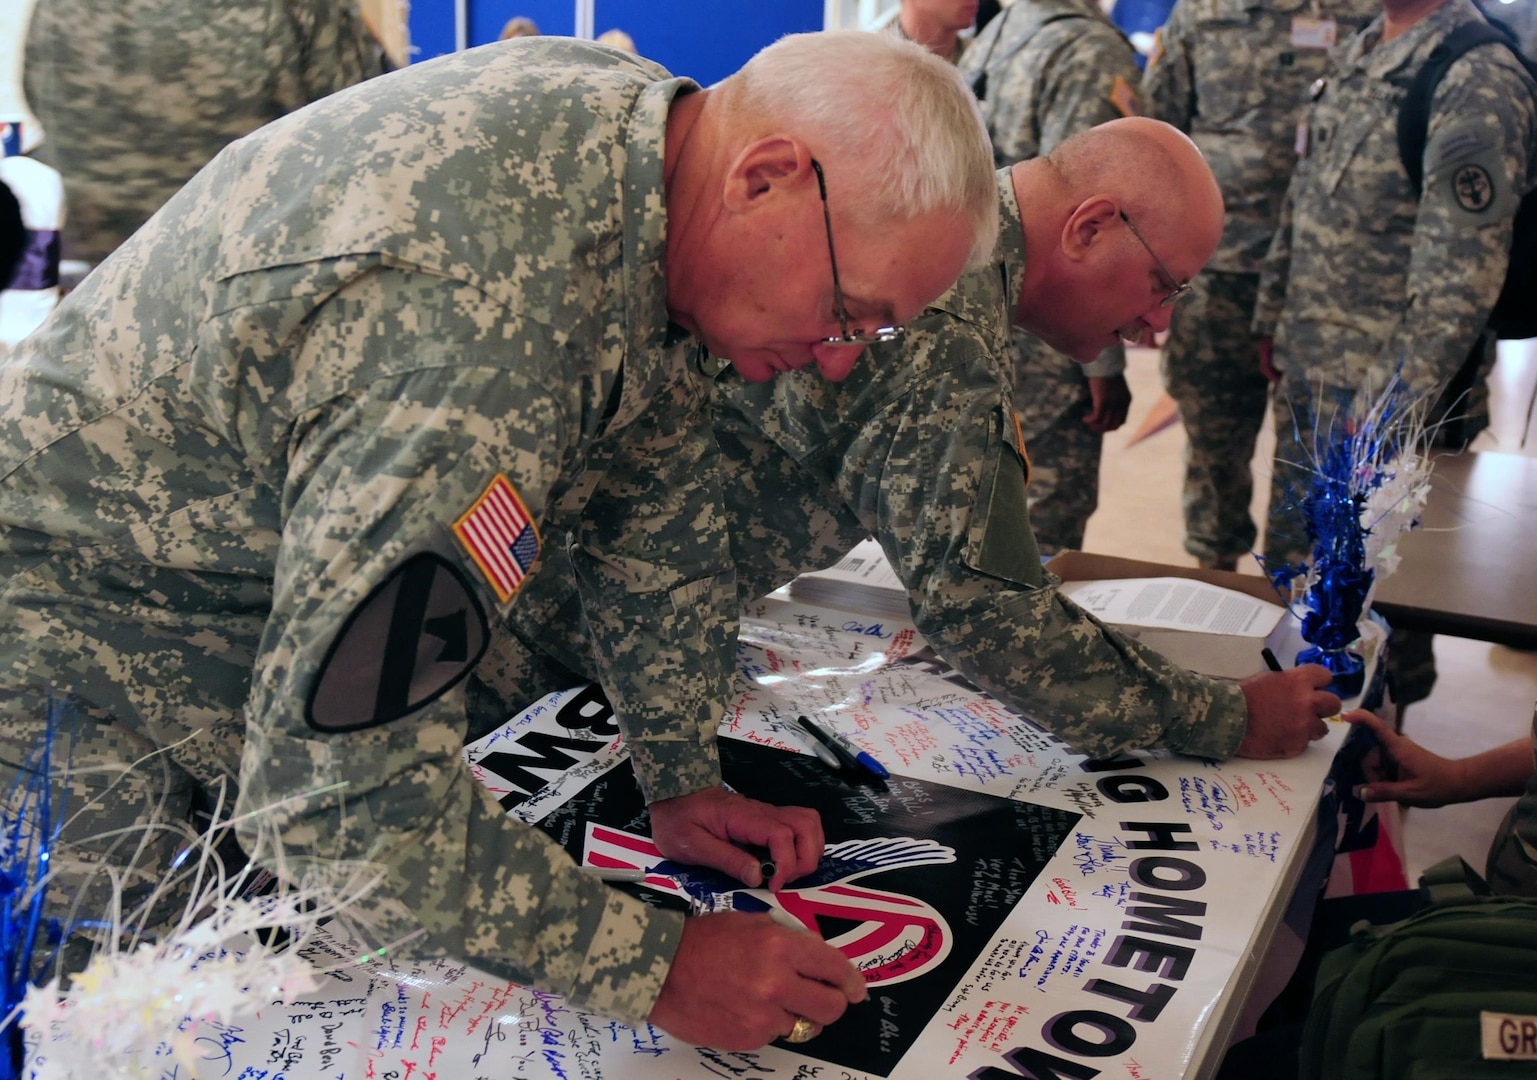 Maj. Gen Dennis Celletti, the assistant adjutant general for Army of the Illinois National Guard, right, and Command Sgt. Maj. John Starbody, the senior enlisted adviser for the Illinois Army National Guard, sign a banner to honor the Soldiers who took part in the injured warrior muster at Rock Island Arsenal Garrison, Oct. 18, 2010.